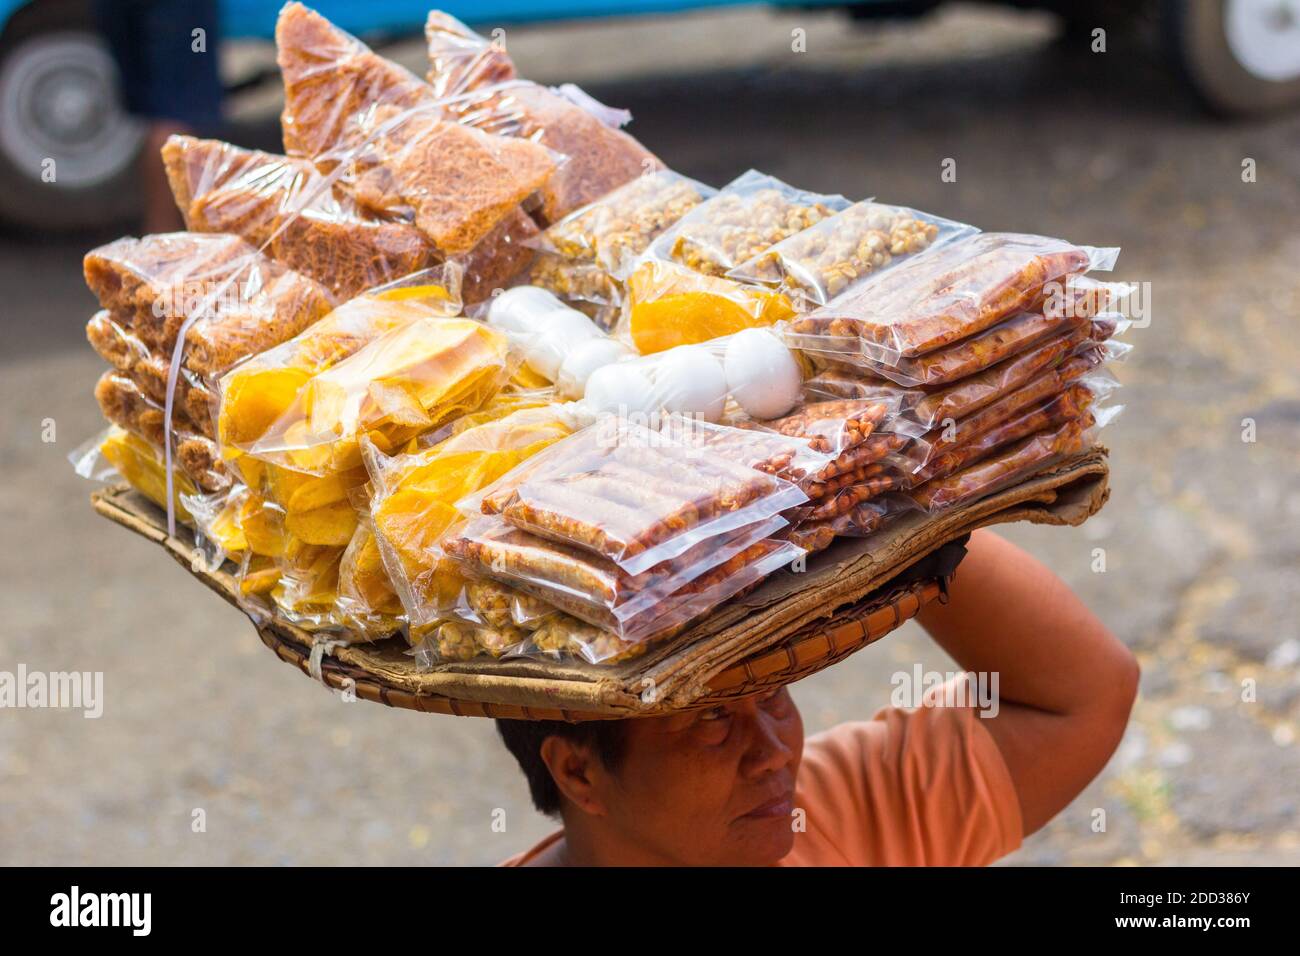 Local delicacies and sweets at a bus terminal in Zamboanga, Philippines Stock Photo